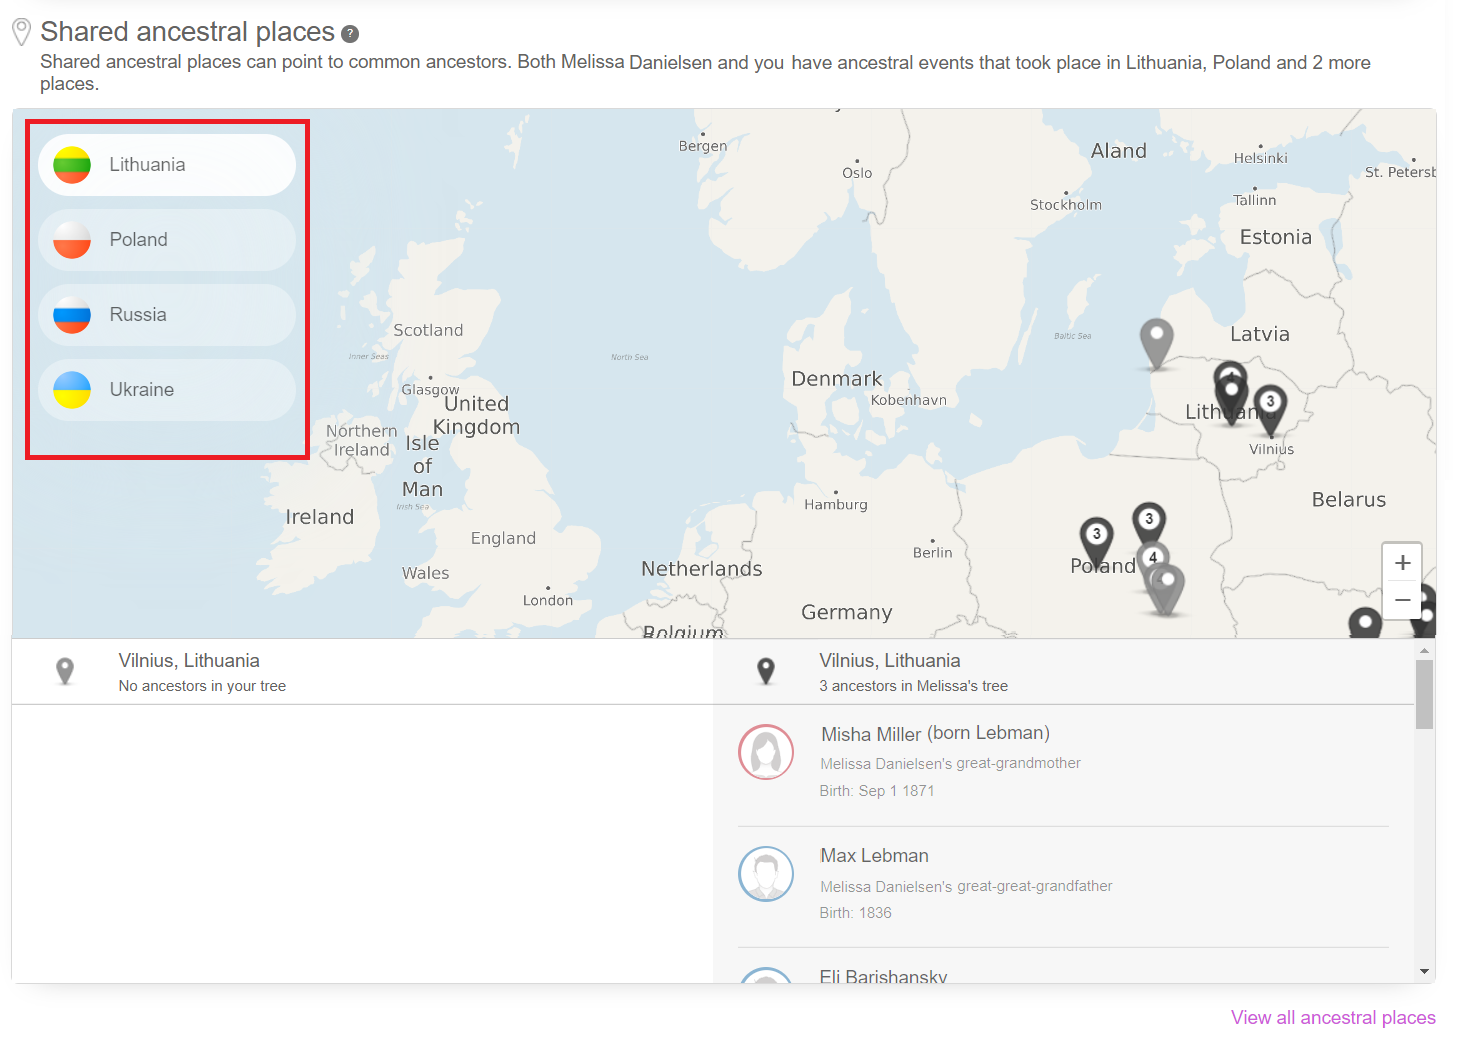 Selecting a country in the Shared Ancestral Places section (click to zoom)